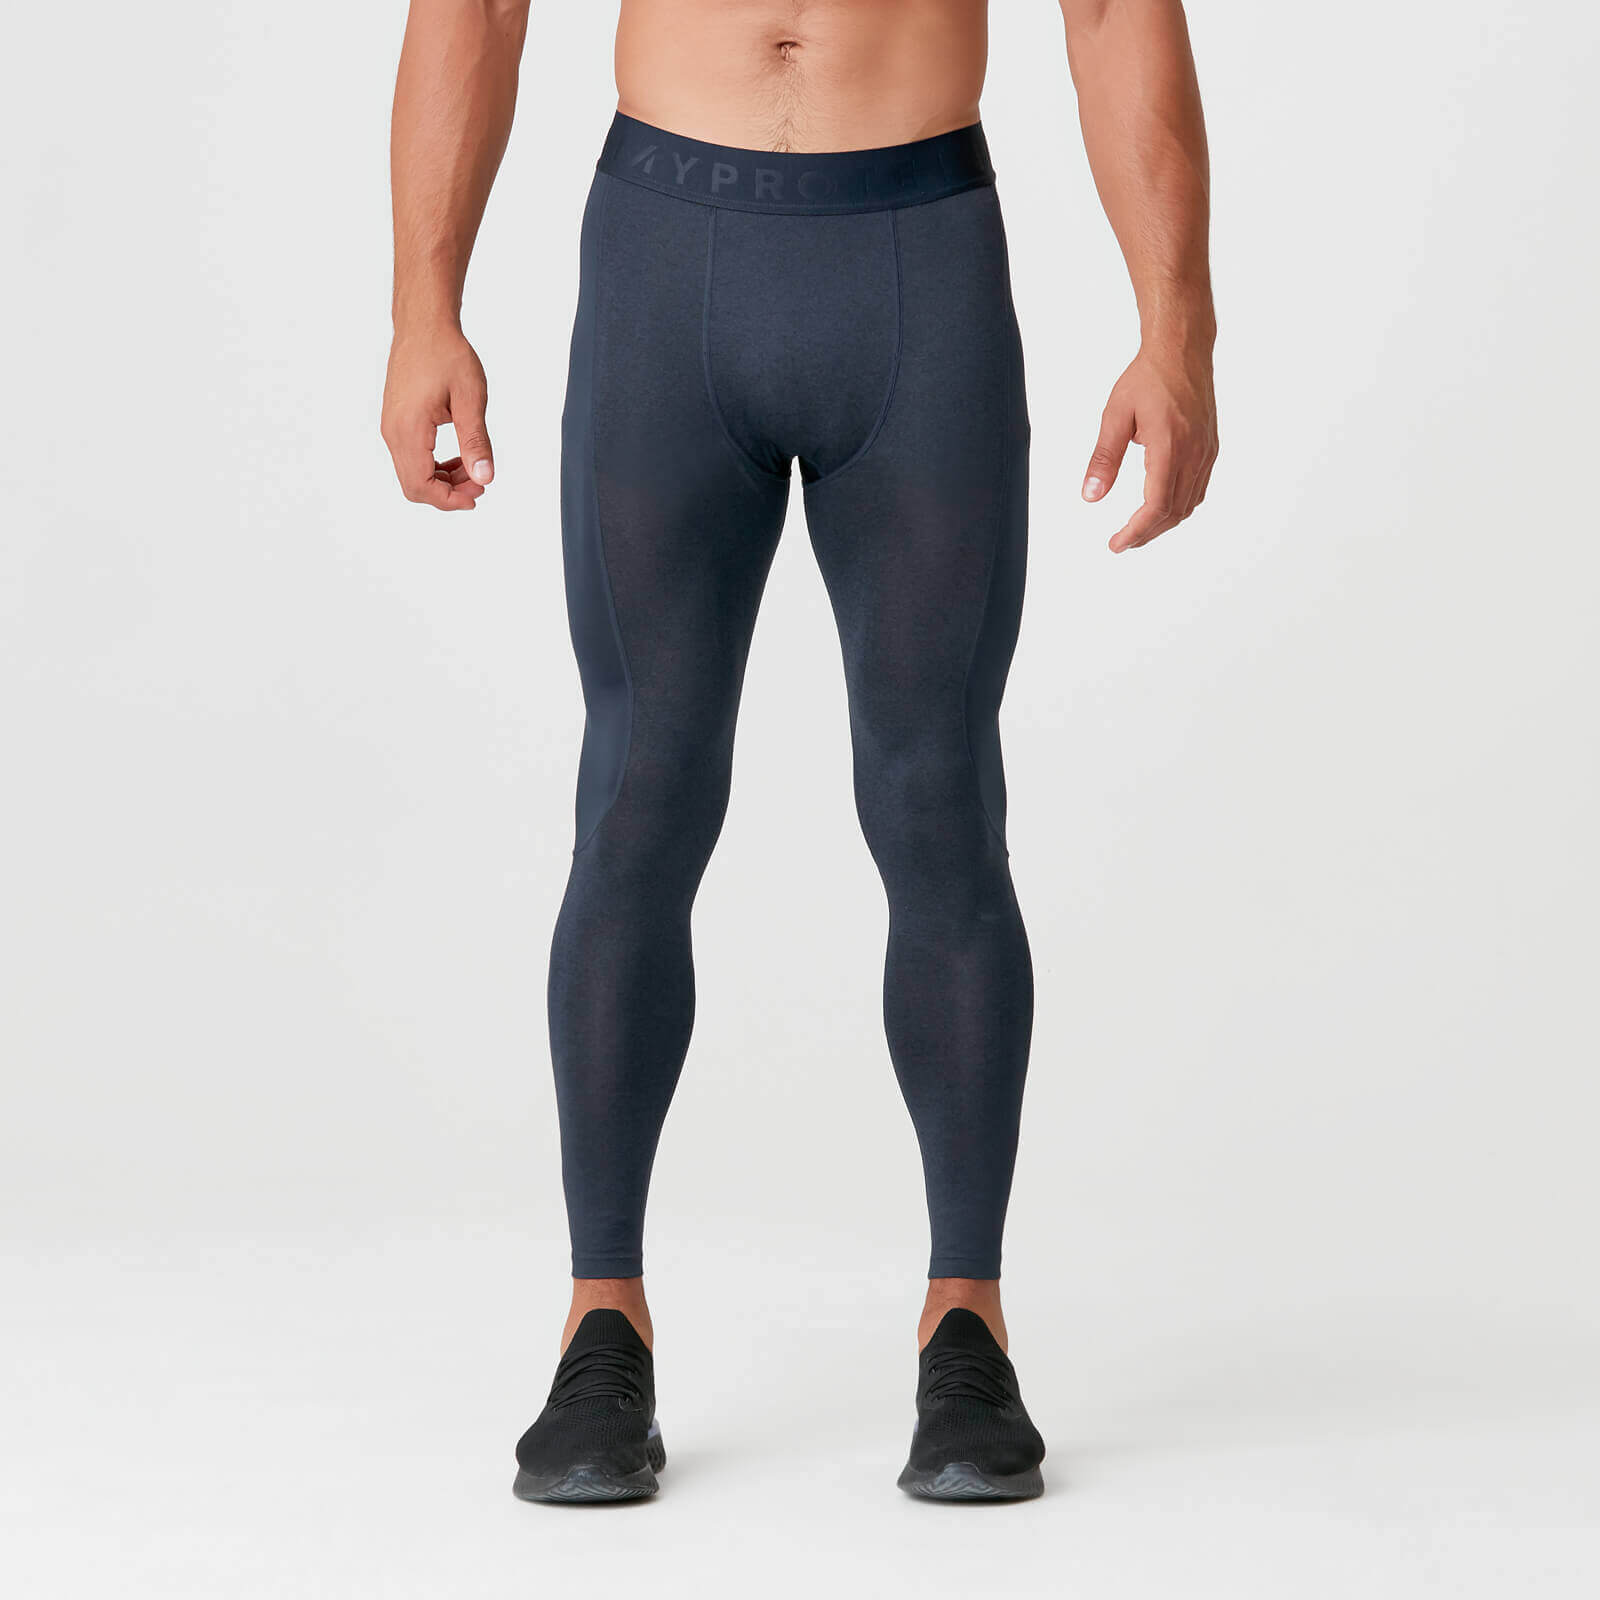 MP Men's Charge Compression Tights - Navy Marl